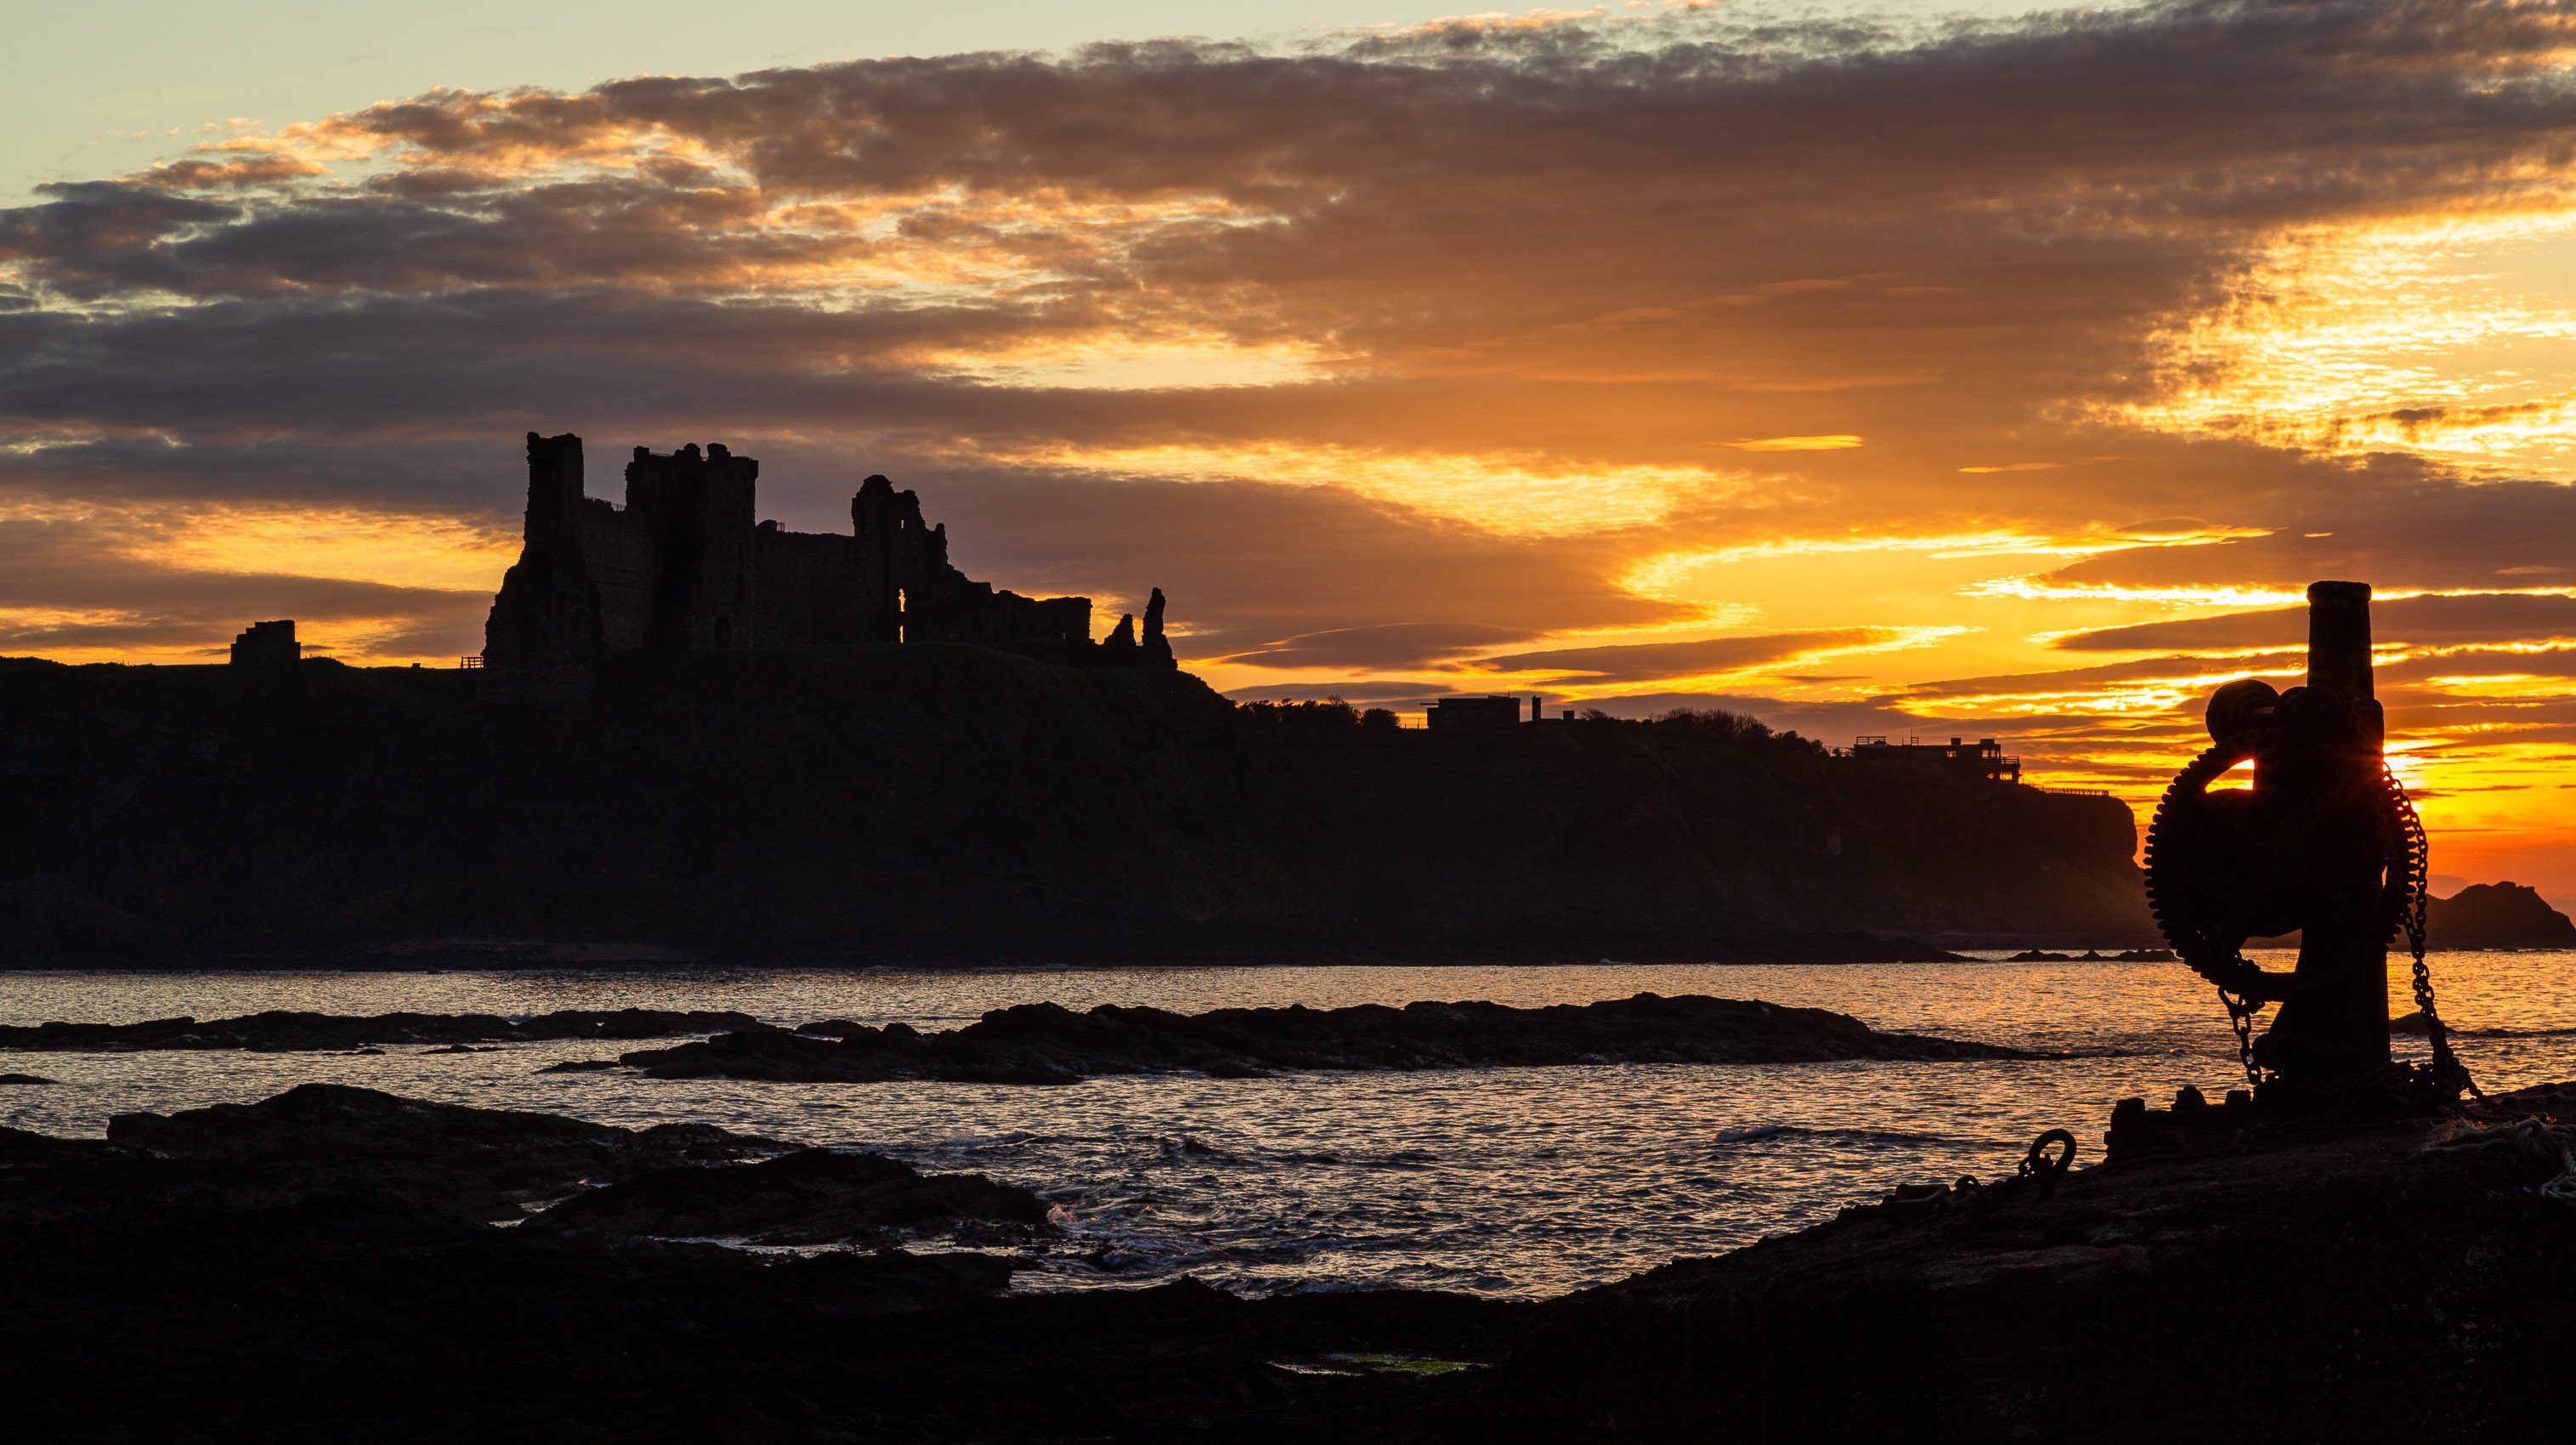 Tantallon Castle silhouetted against the sunset from Seacliff, East Lothian, Scotland. LN003